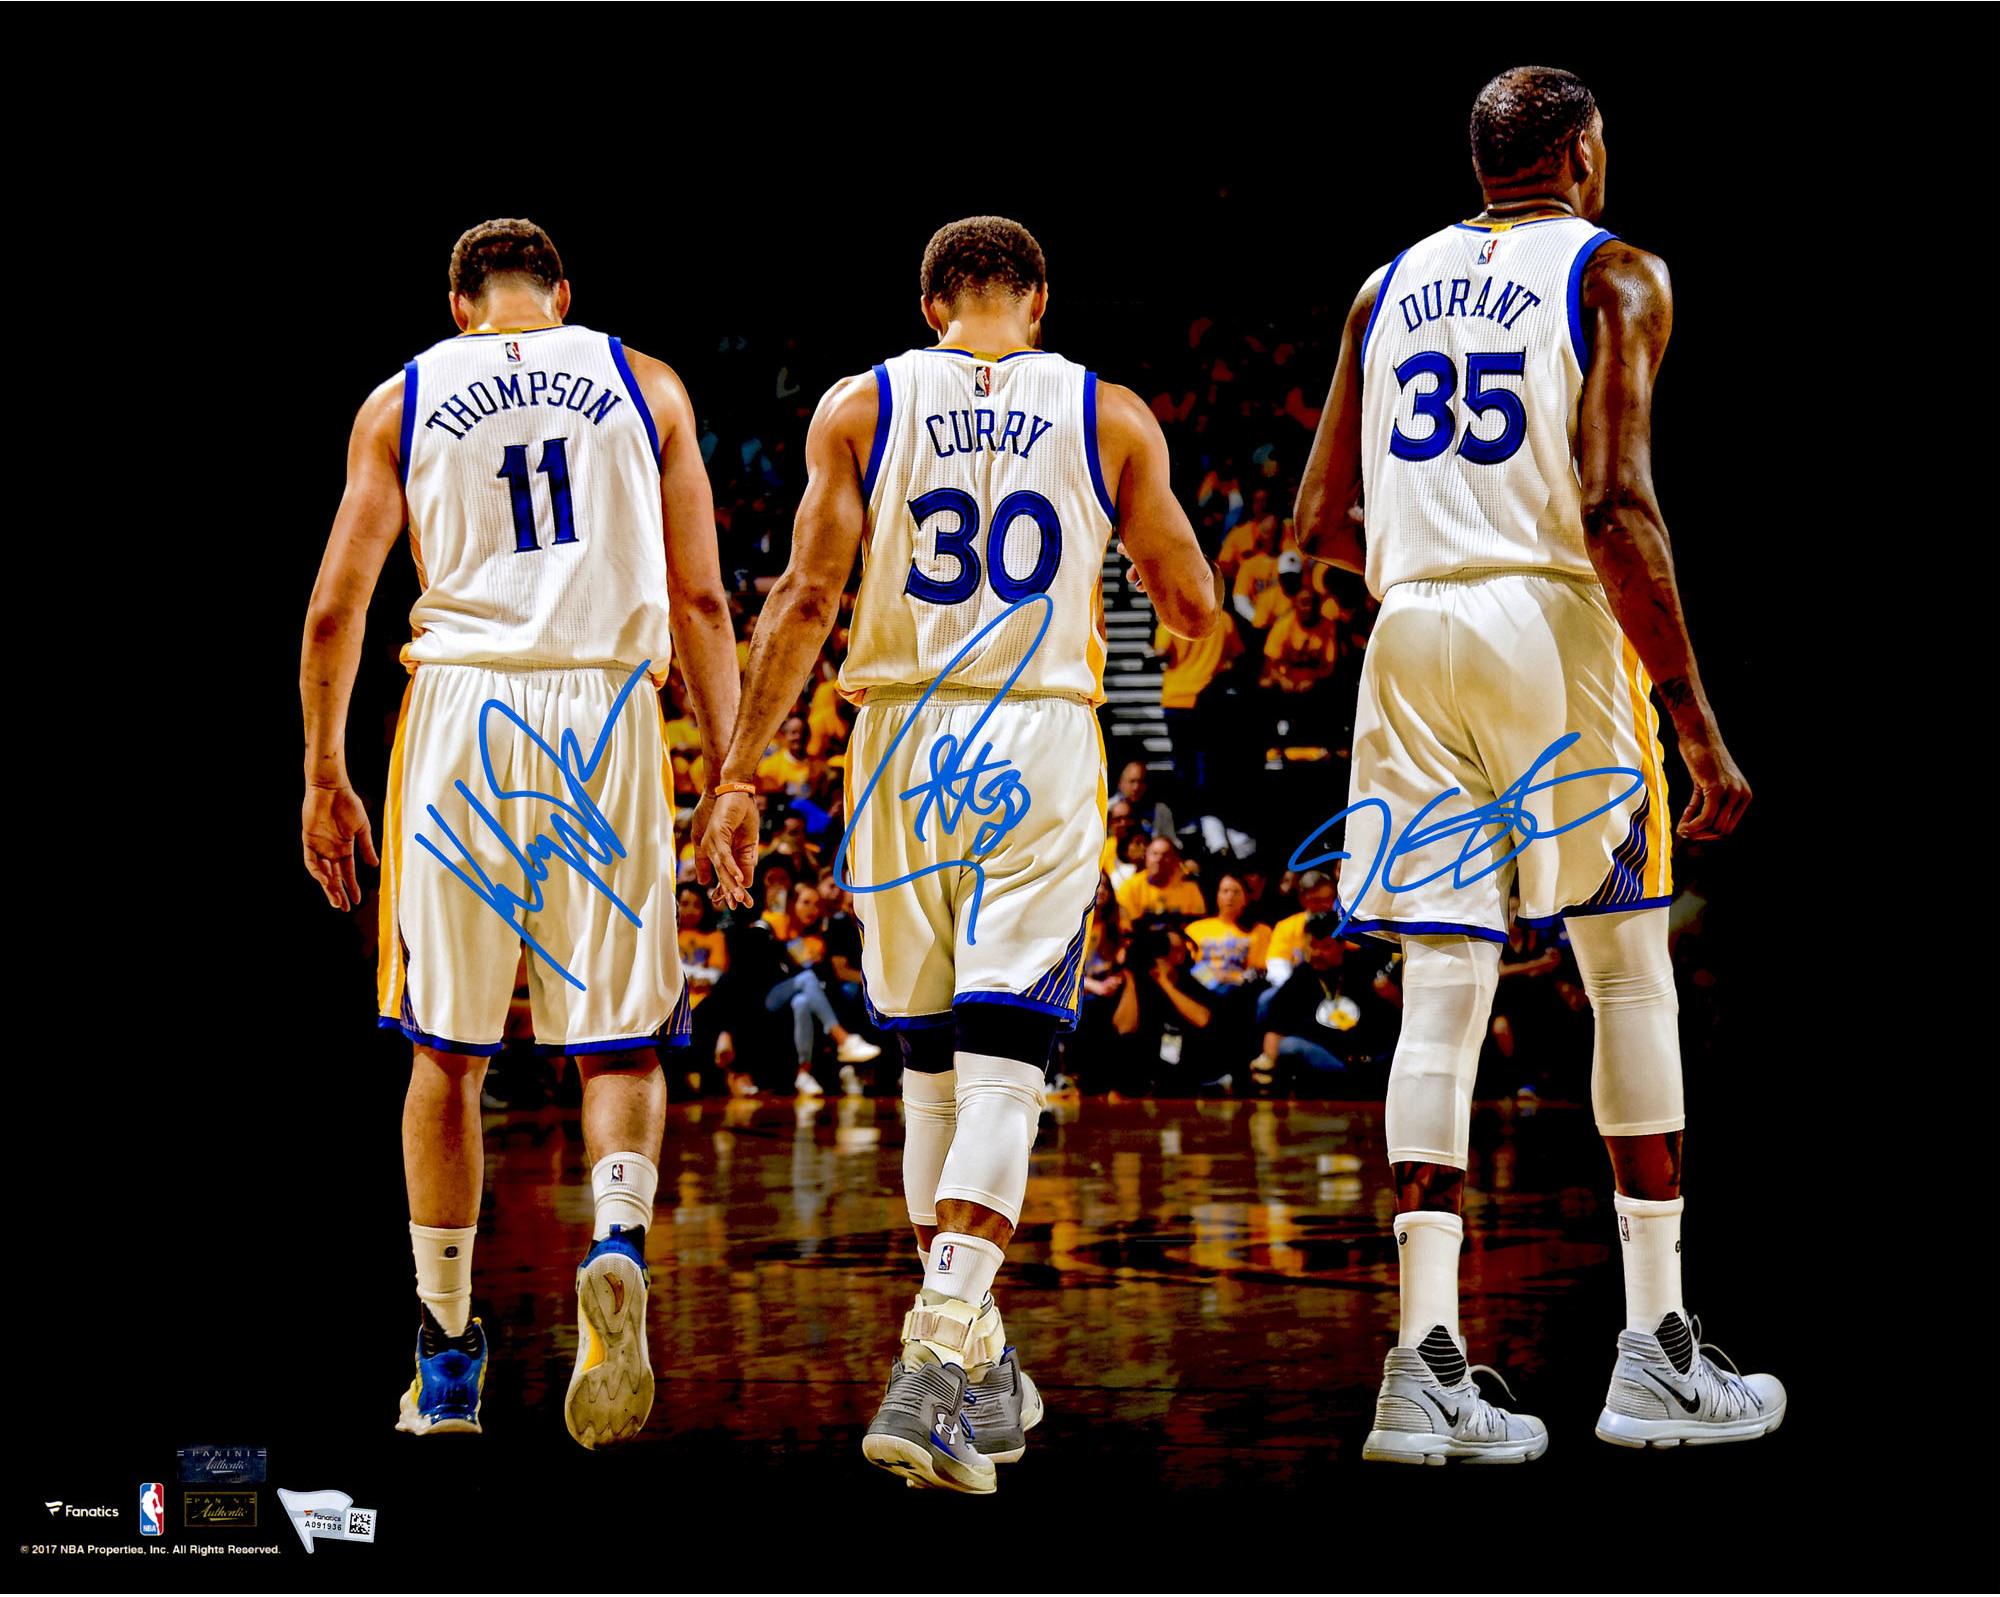 stephen-curry-klay-thompson-kevin-durant-golden-state-warriors-autographed-16-x-20-2017-nba-finals-champions-walking-away-photograph5-t7270459-2000-2308-5a685a059e339